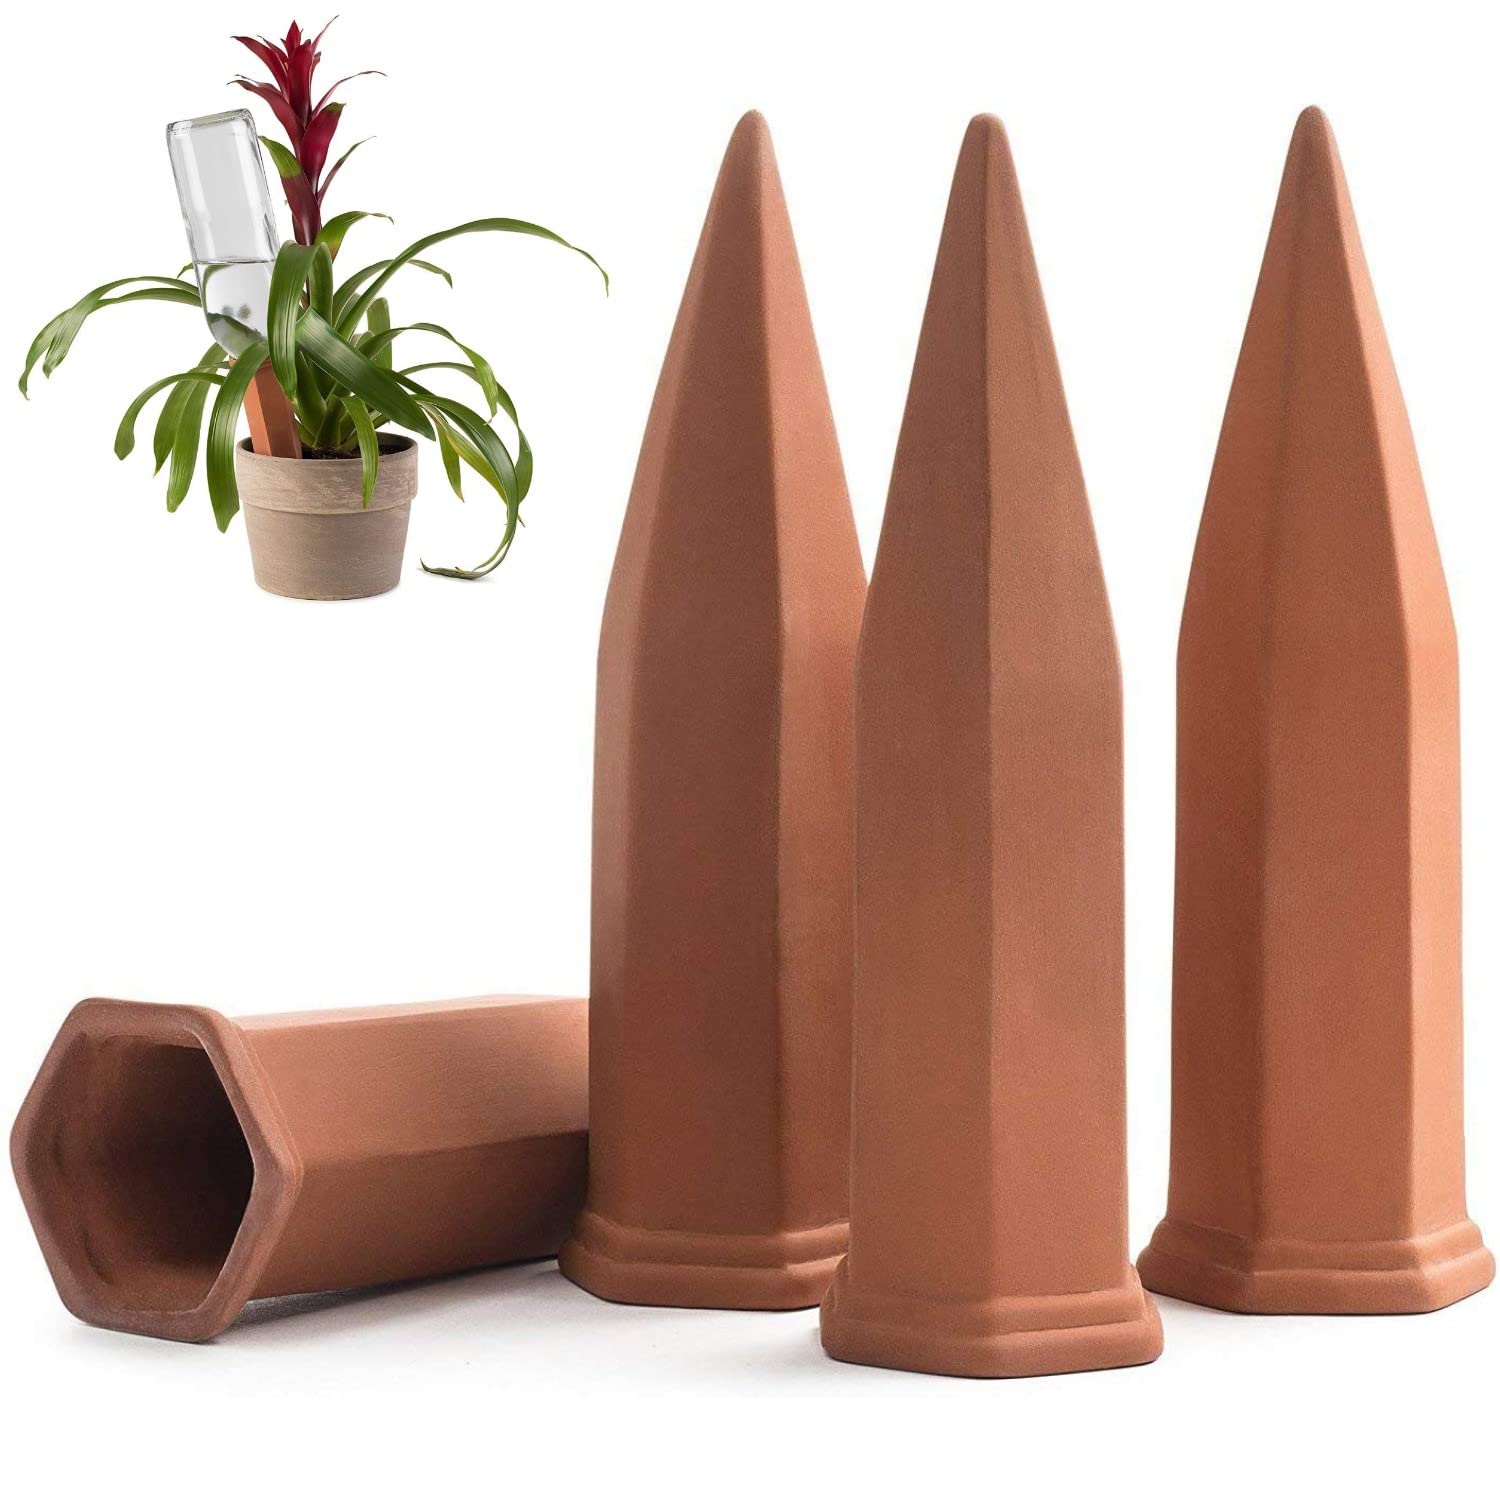 Modern Innovations Ceramic Terracotta Self Watering Spikes (4 Pack) Vacation Automatic Plant Waterer Devices, Indoor/Outdoor Pla